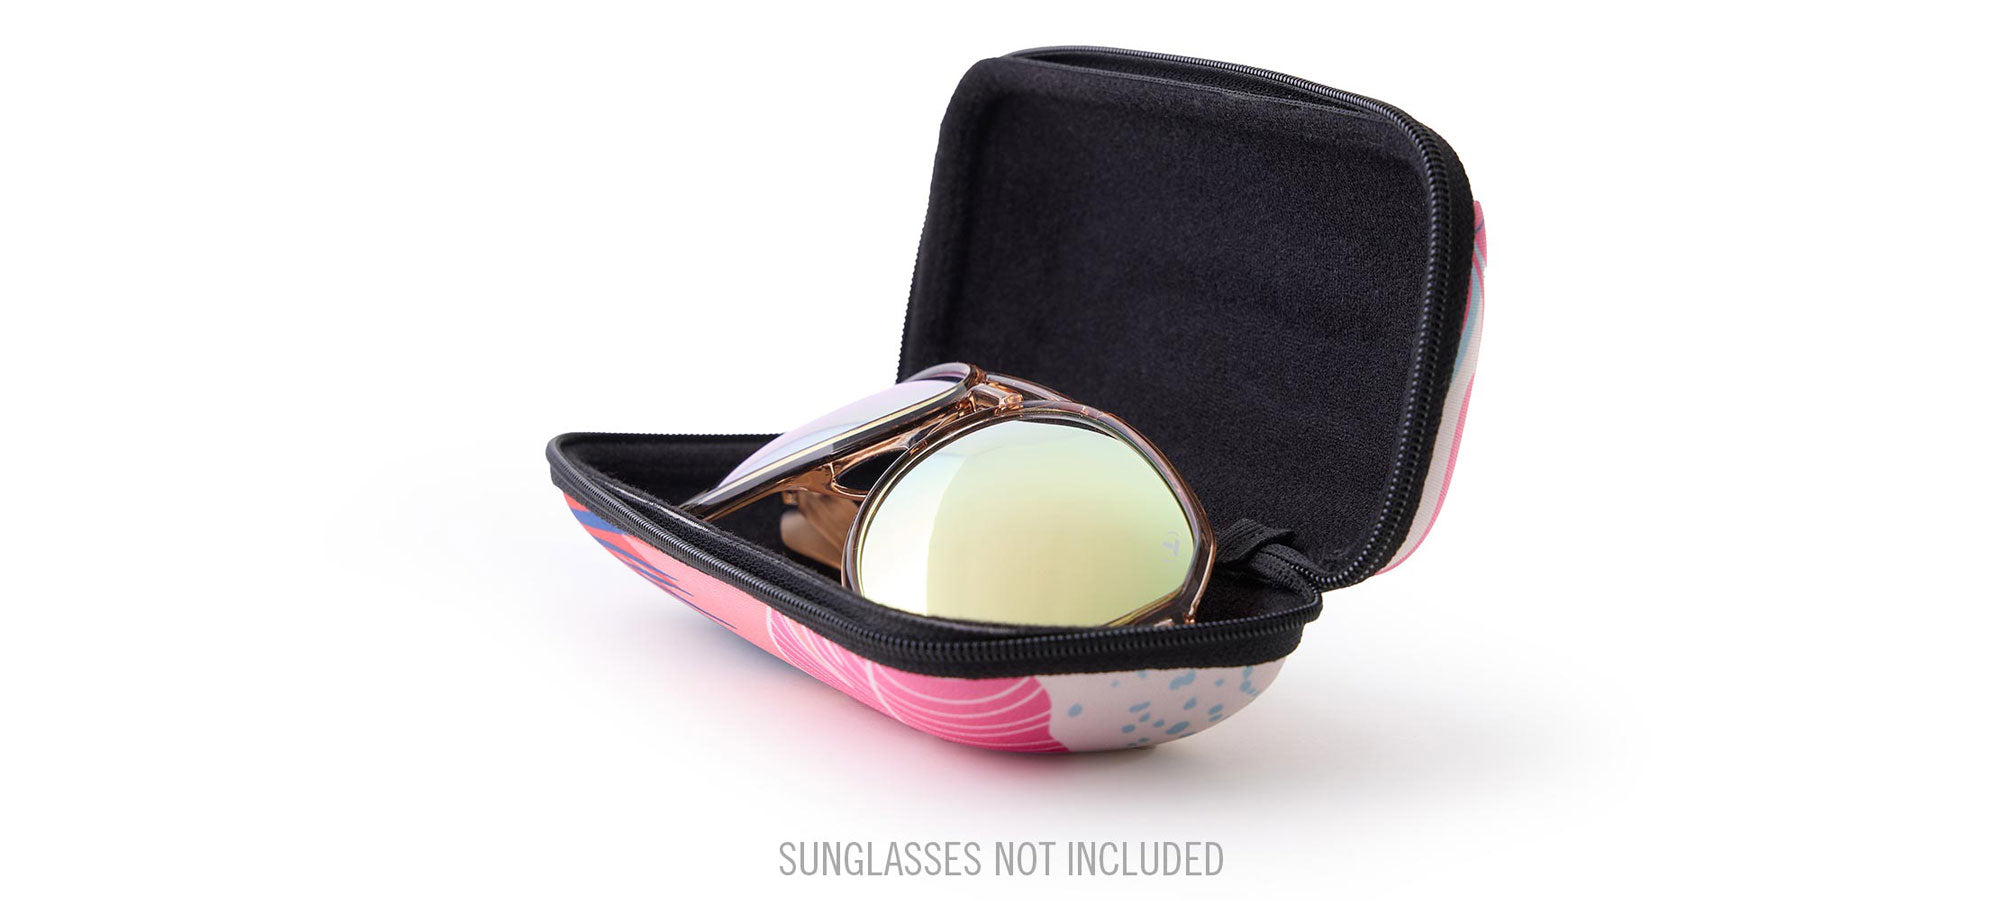 Sunglasses Holder Open with sample sunglasses (not included)